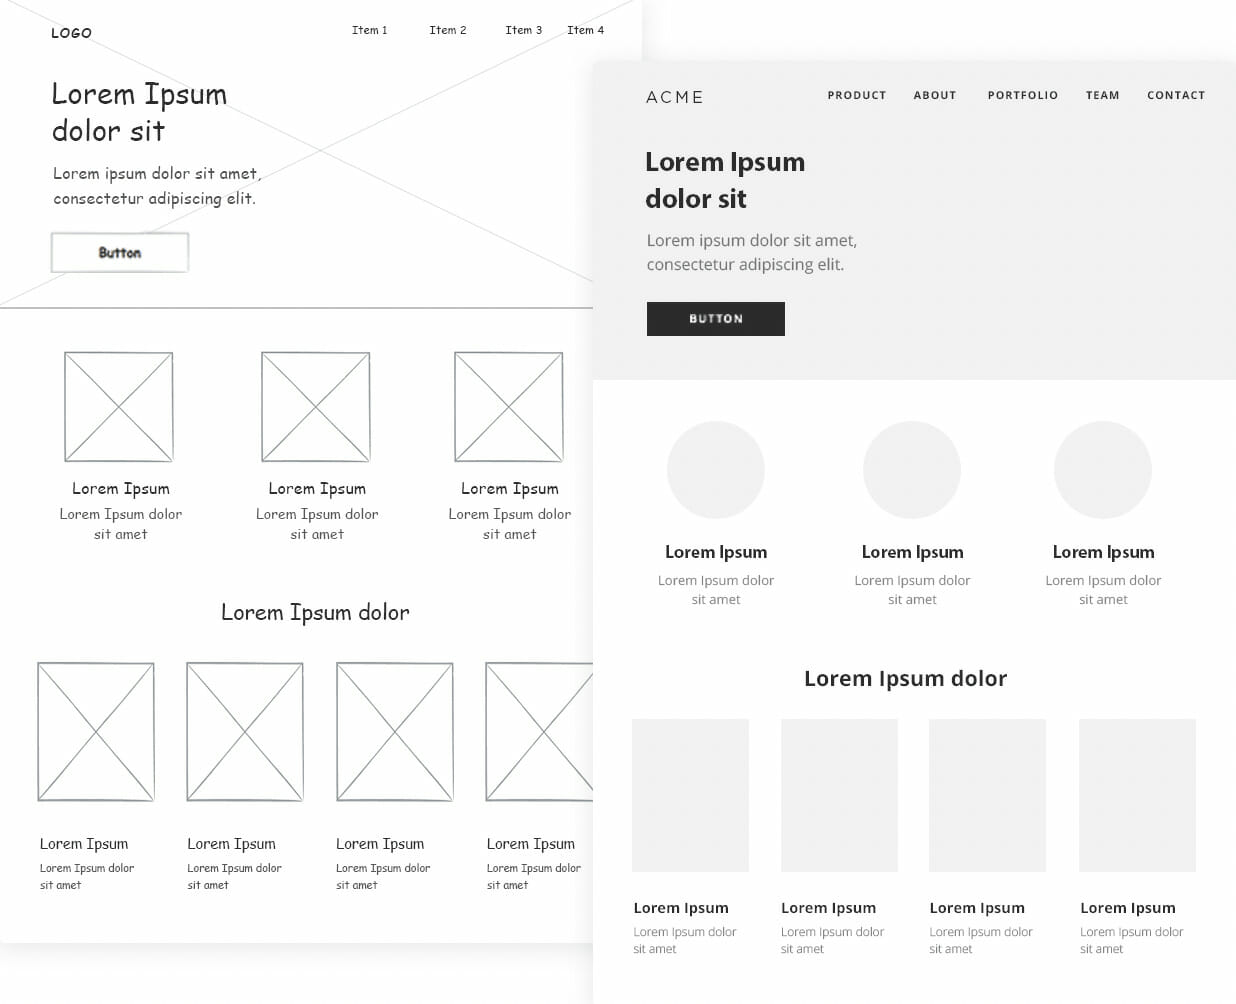 low-fidelity wireframe with placeholder text box and image placeholders 